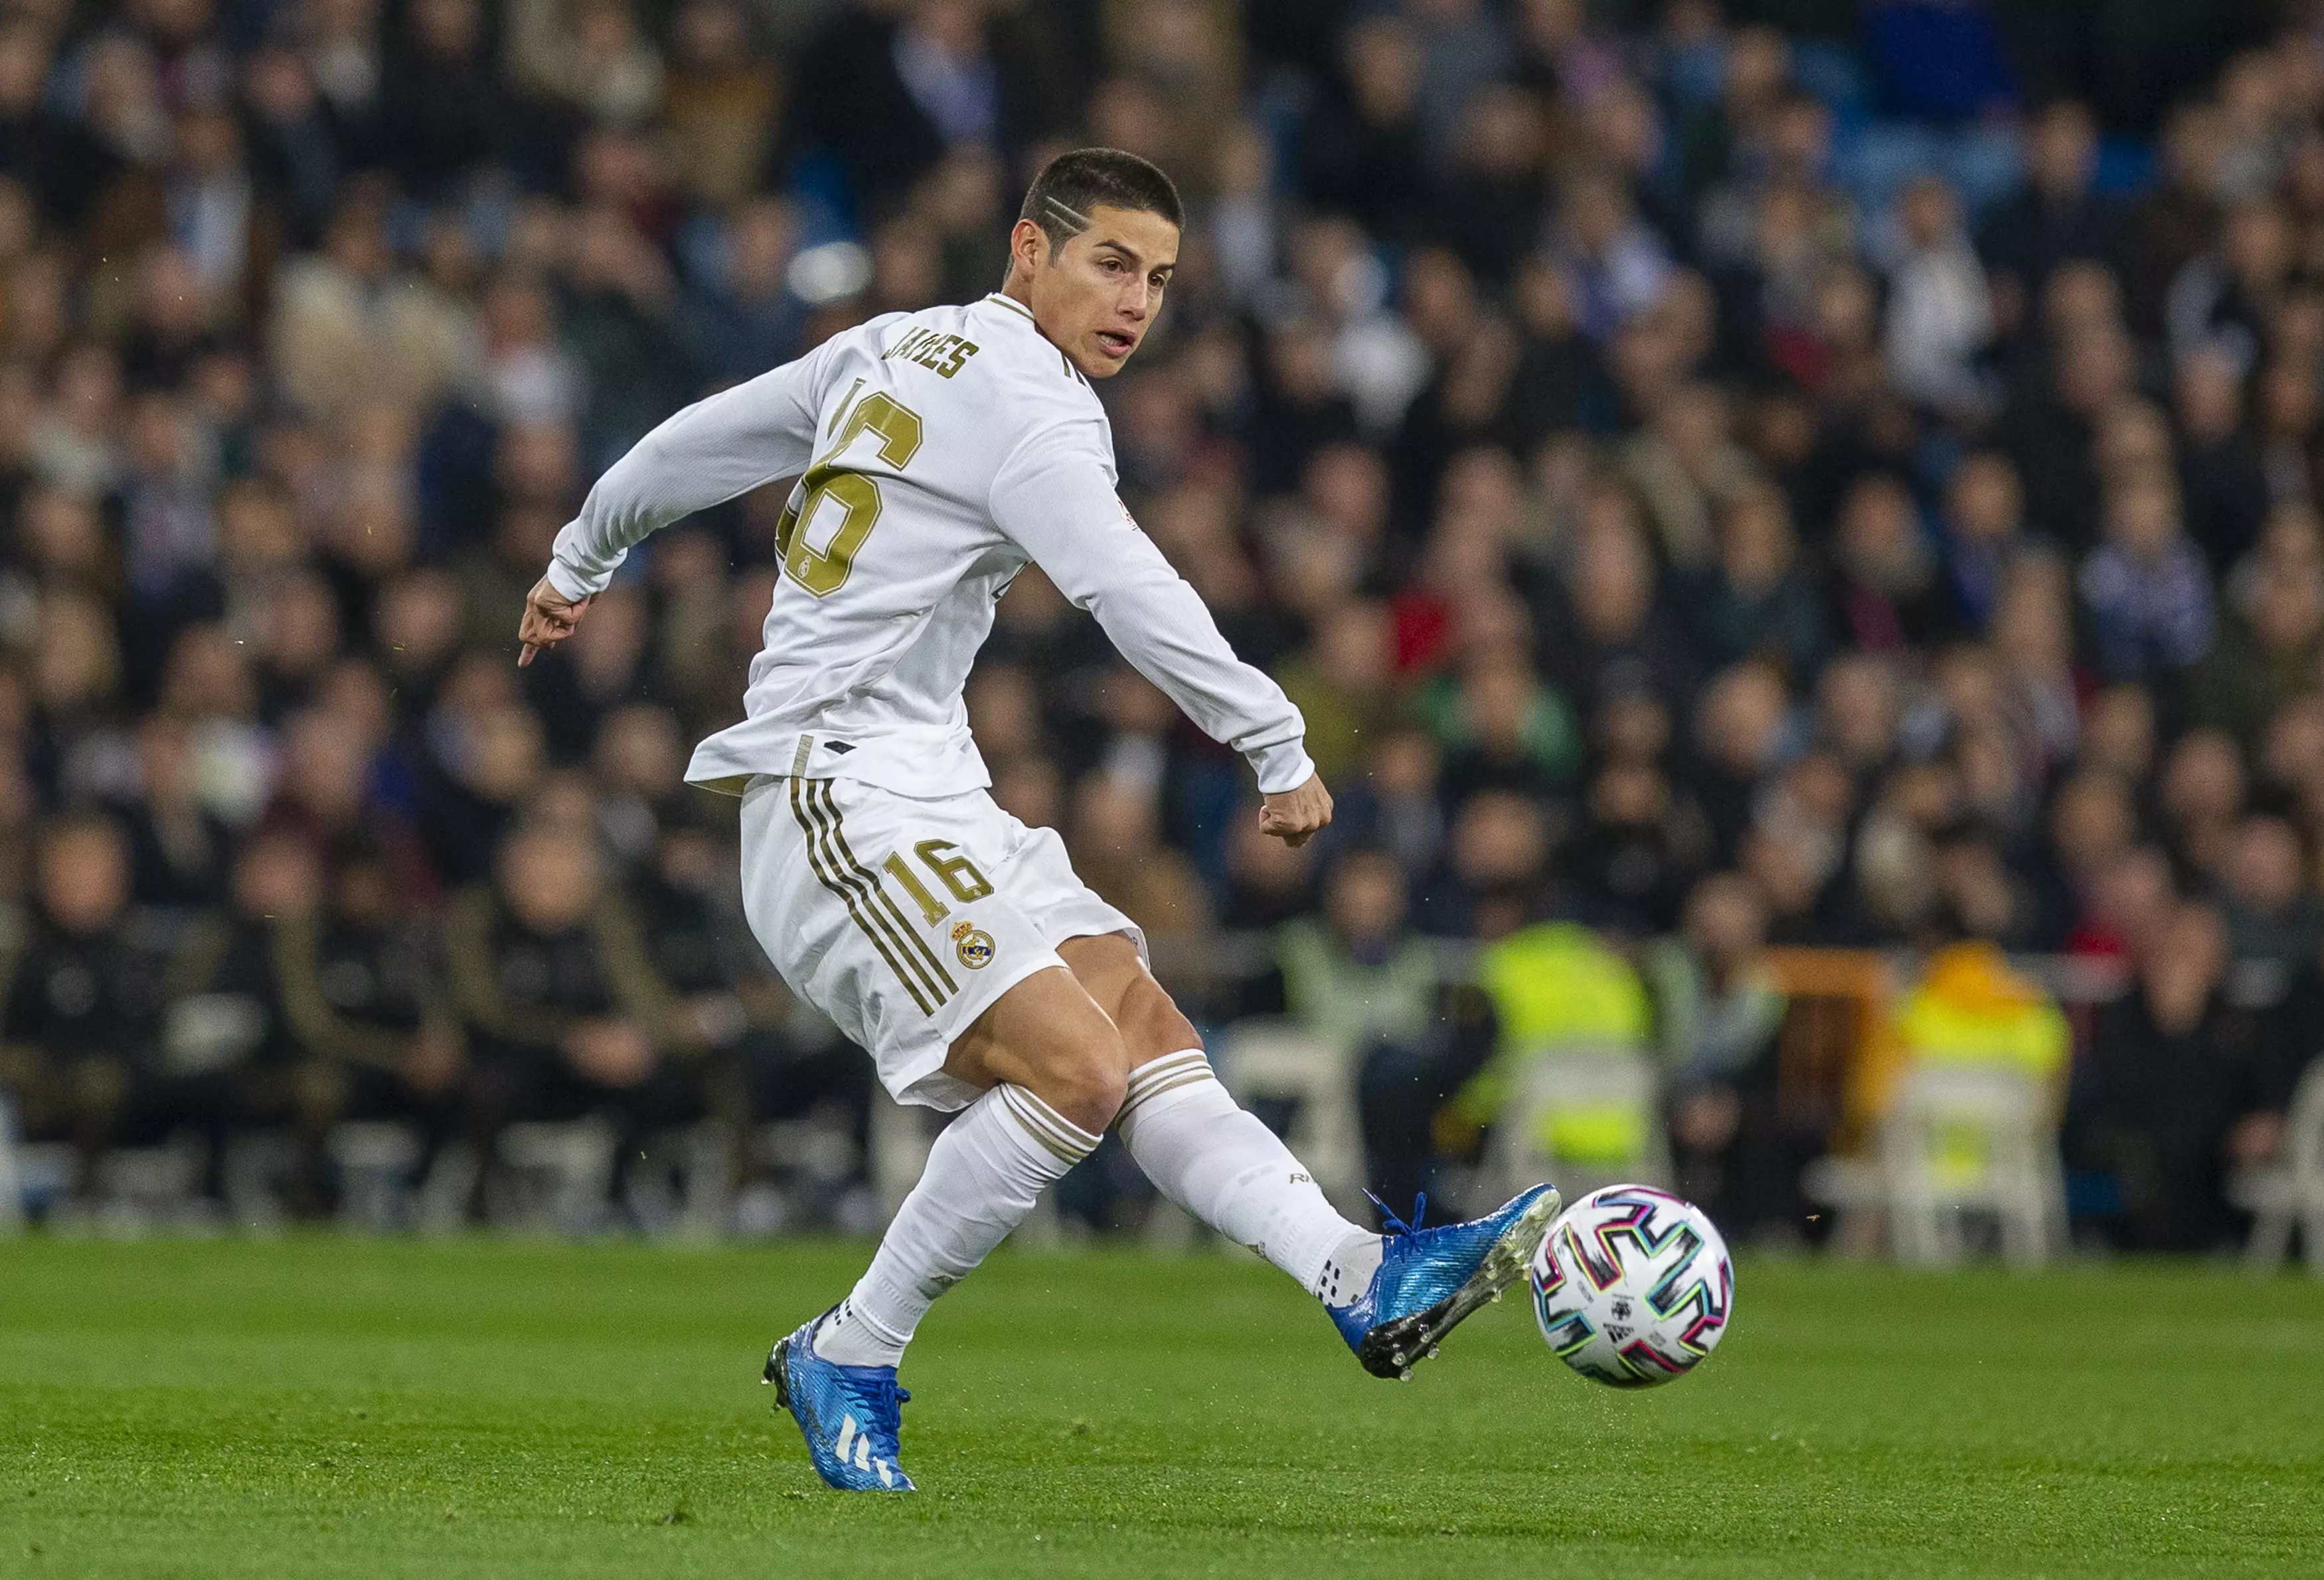 Rodriguez in a rare appearance for Real this season. Image: PA Images